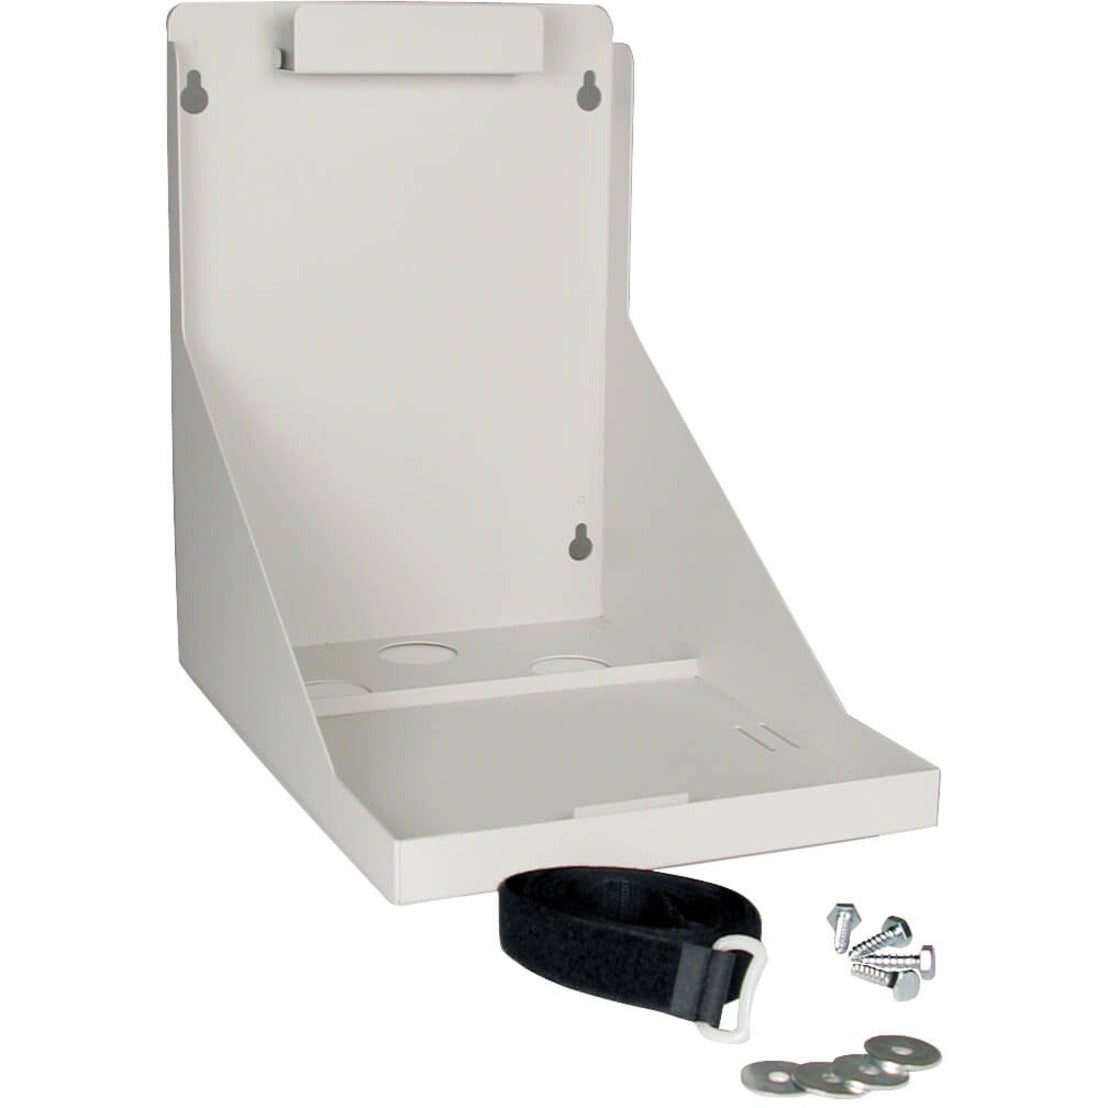 Tripp Lite UPSWM Wall Mount Bracket, Easy Installation and Secure Mounting Solution